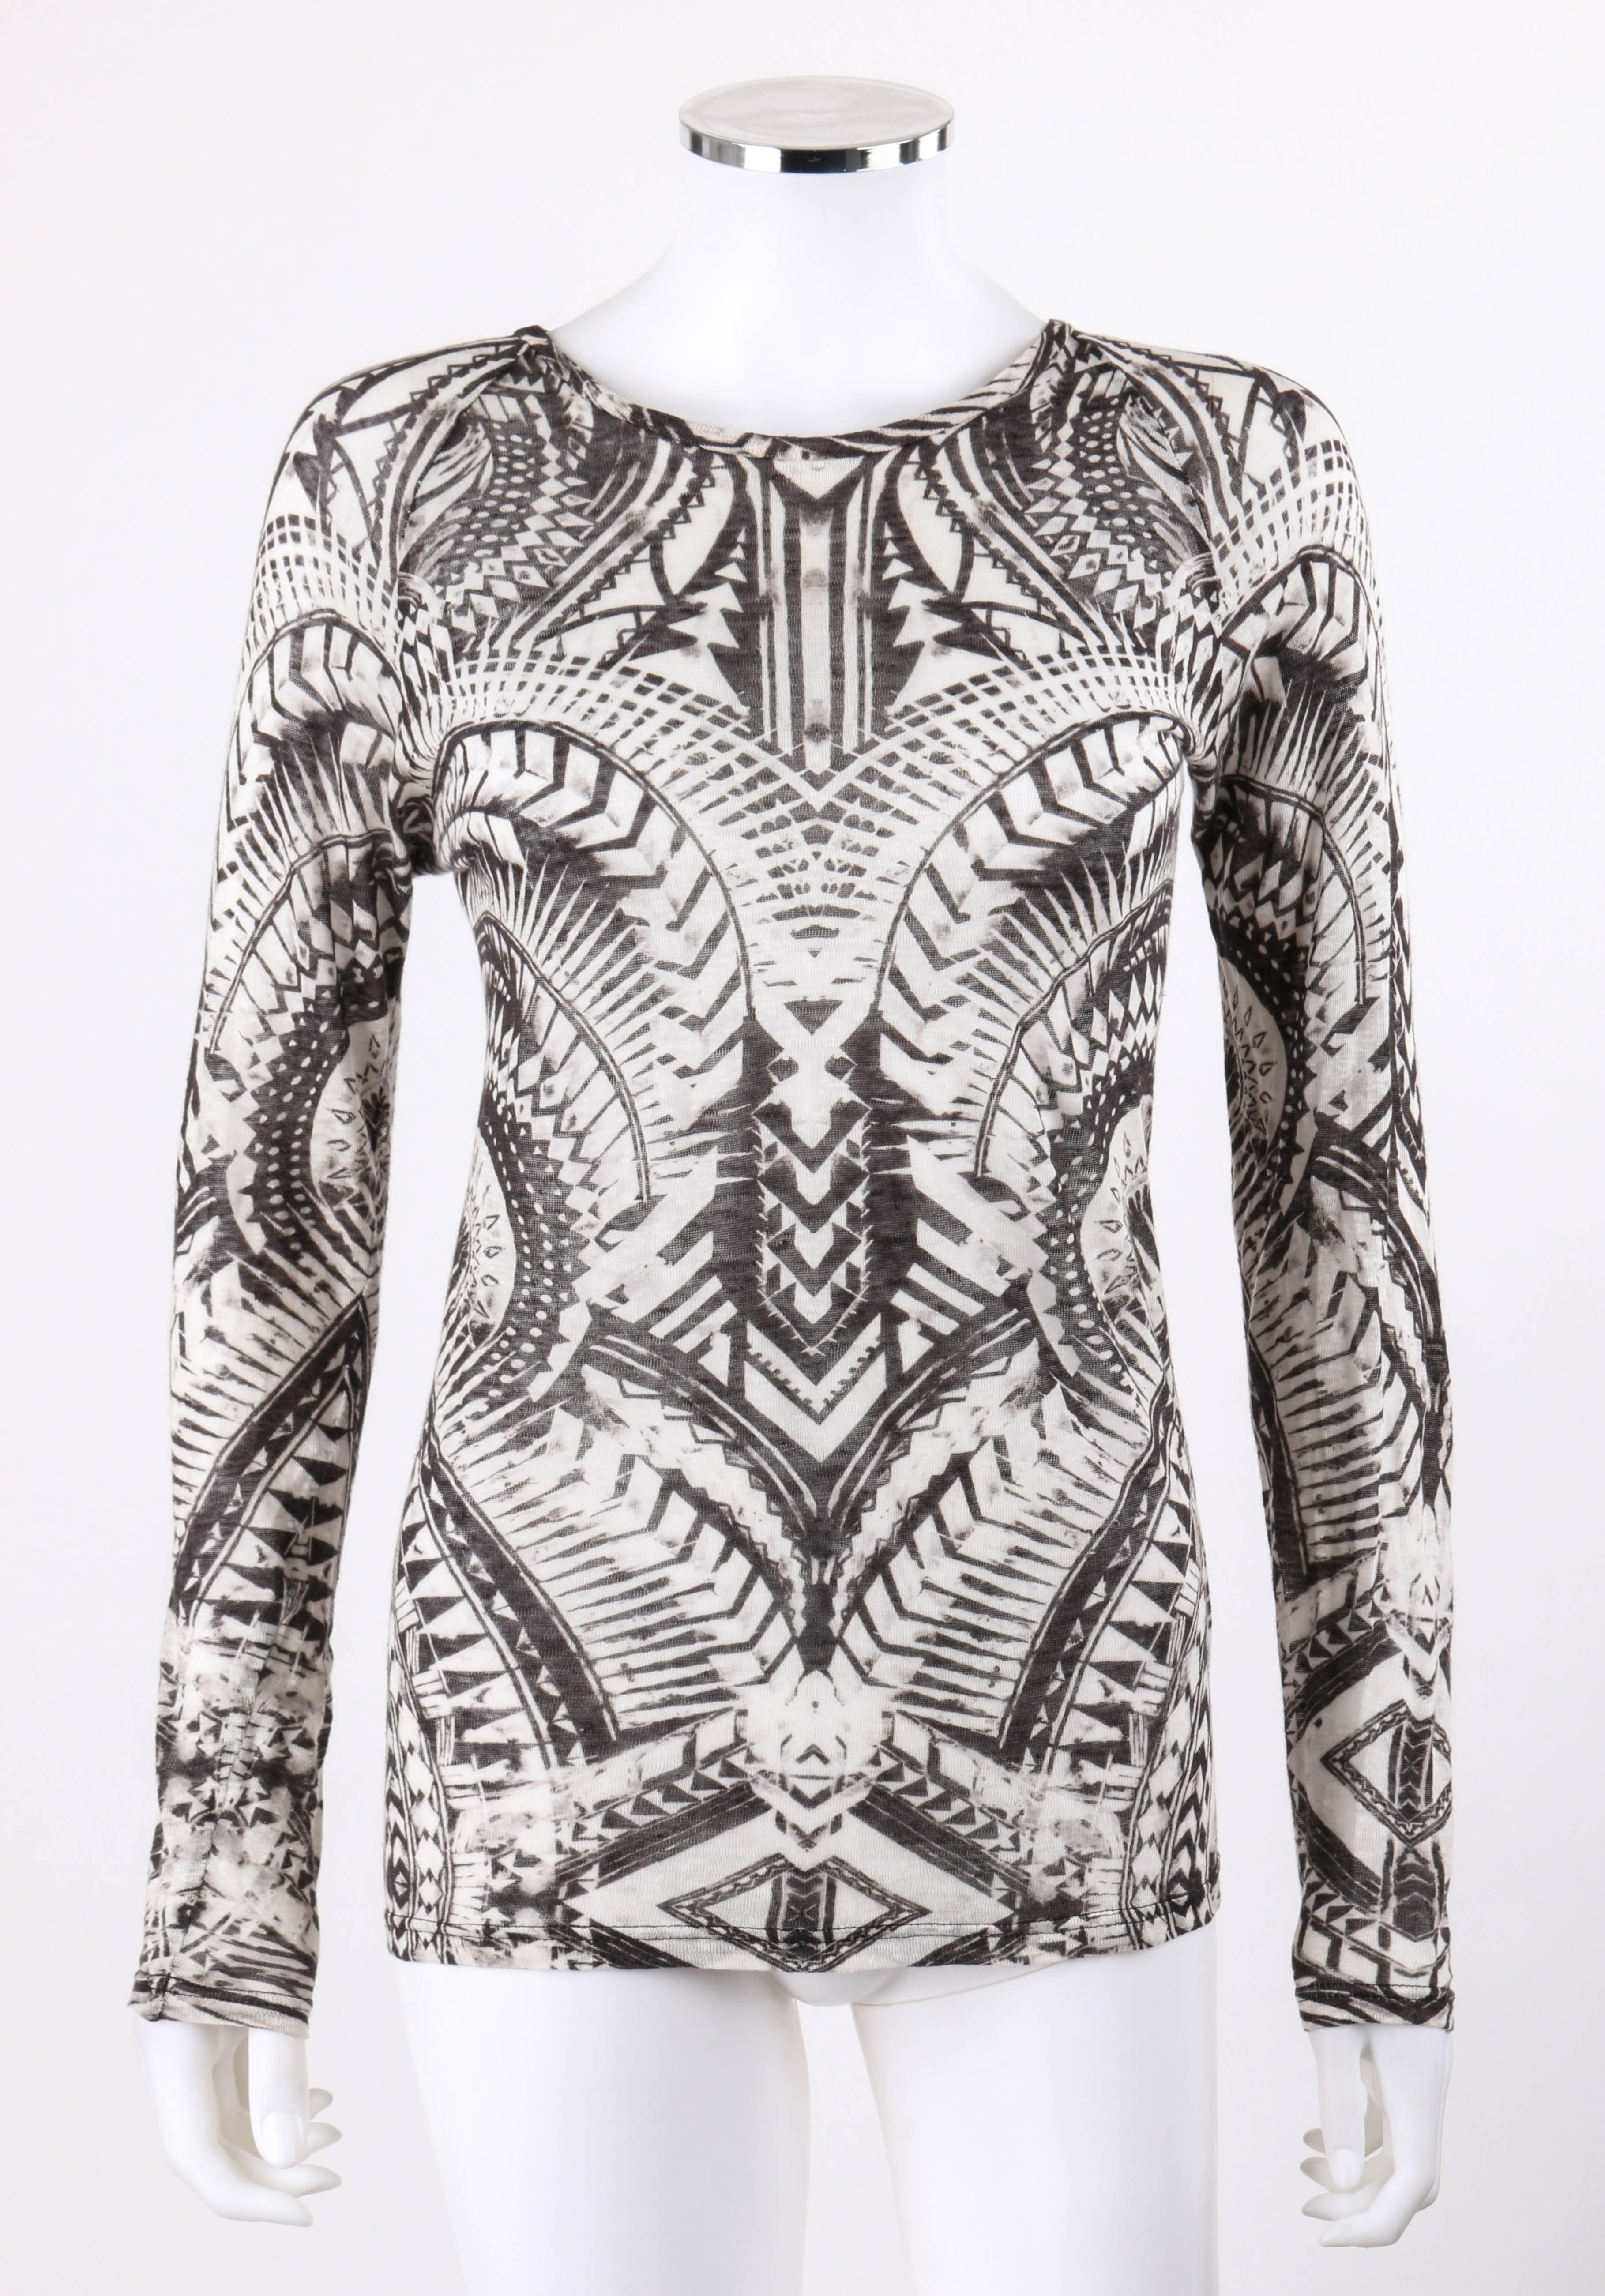 Balmain Resort 2012 black and white abstract print linen knit scoop neck top. Designed by Olivier Rousteing. Faded black and white abstract mirrored print knit. Scoop neck. Long raglan sleeves. Pull over style. Marked Fabric Content: 